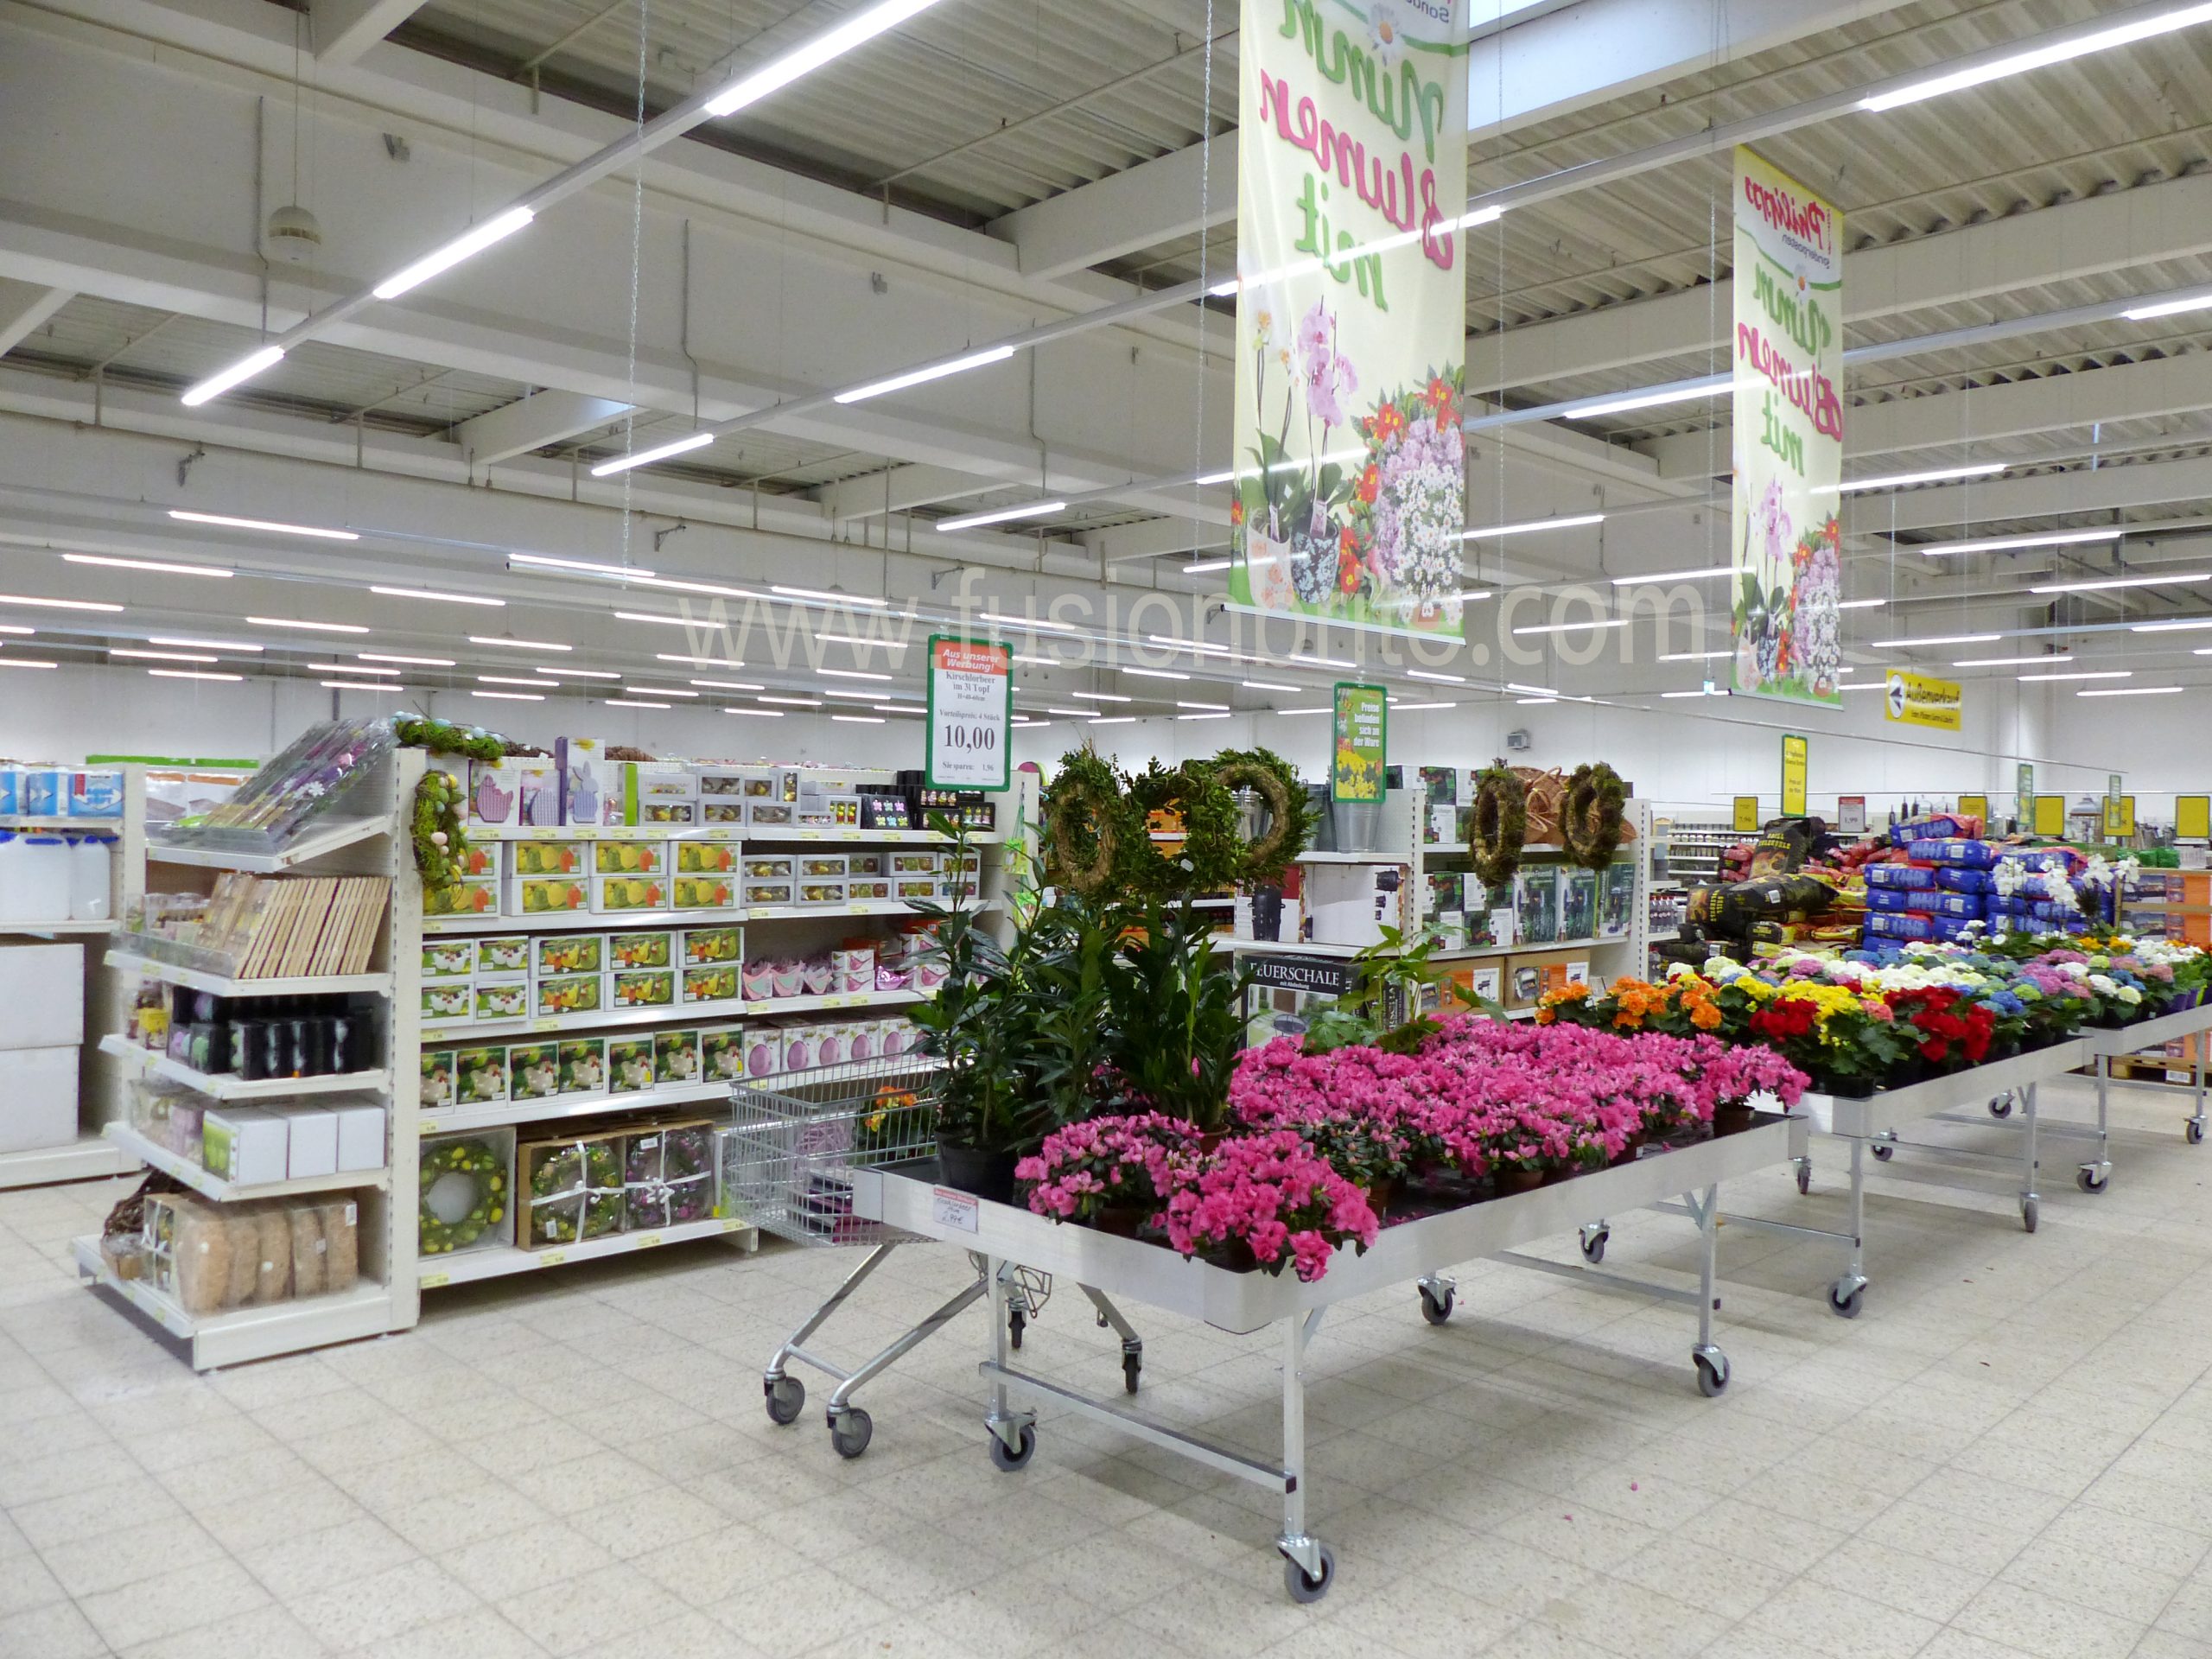 How supermarkets can create the right LED linear lighting that can bring a pleasant shopping experience to customers